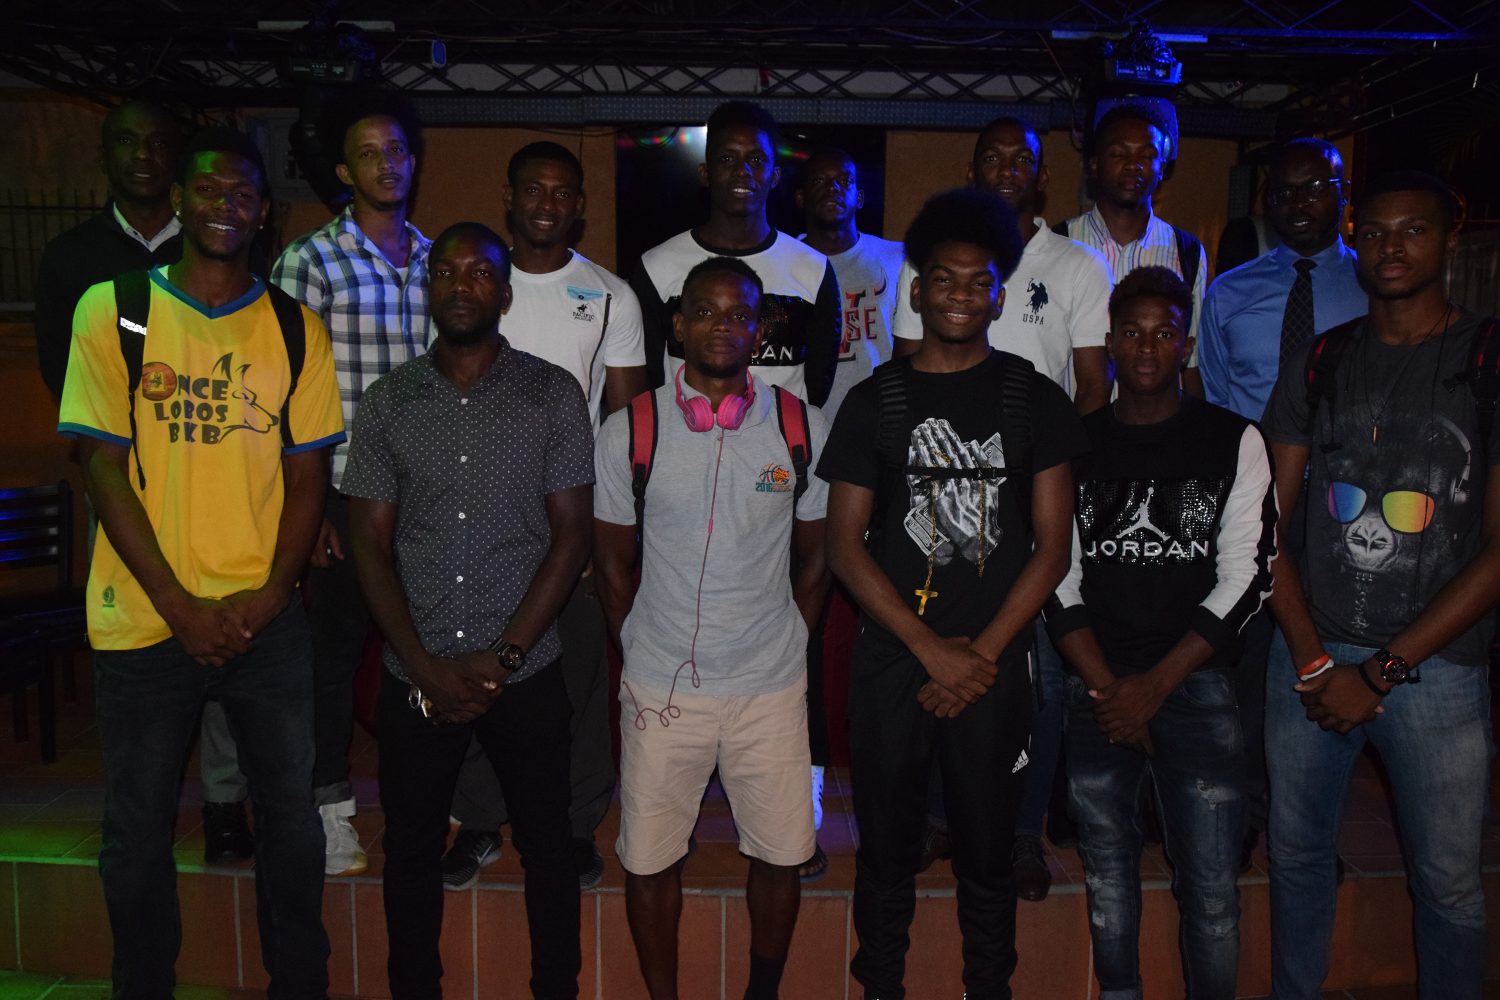 The men’s team that will compete in the three match international series against Barbados pose for a photo opportunity following their announcement at the Palm Court Sports Bar by the GABF
